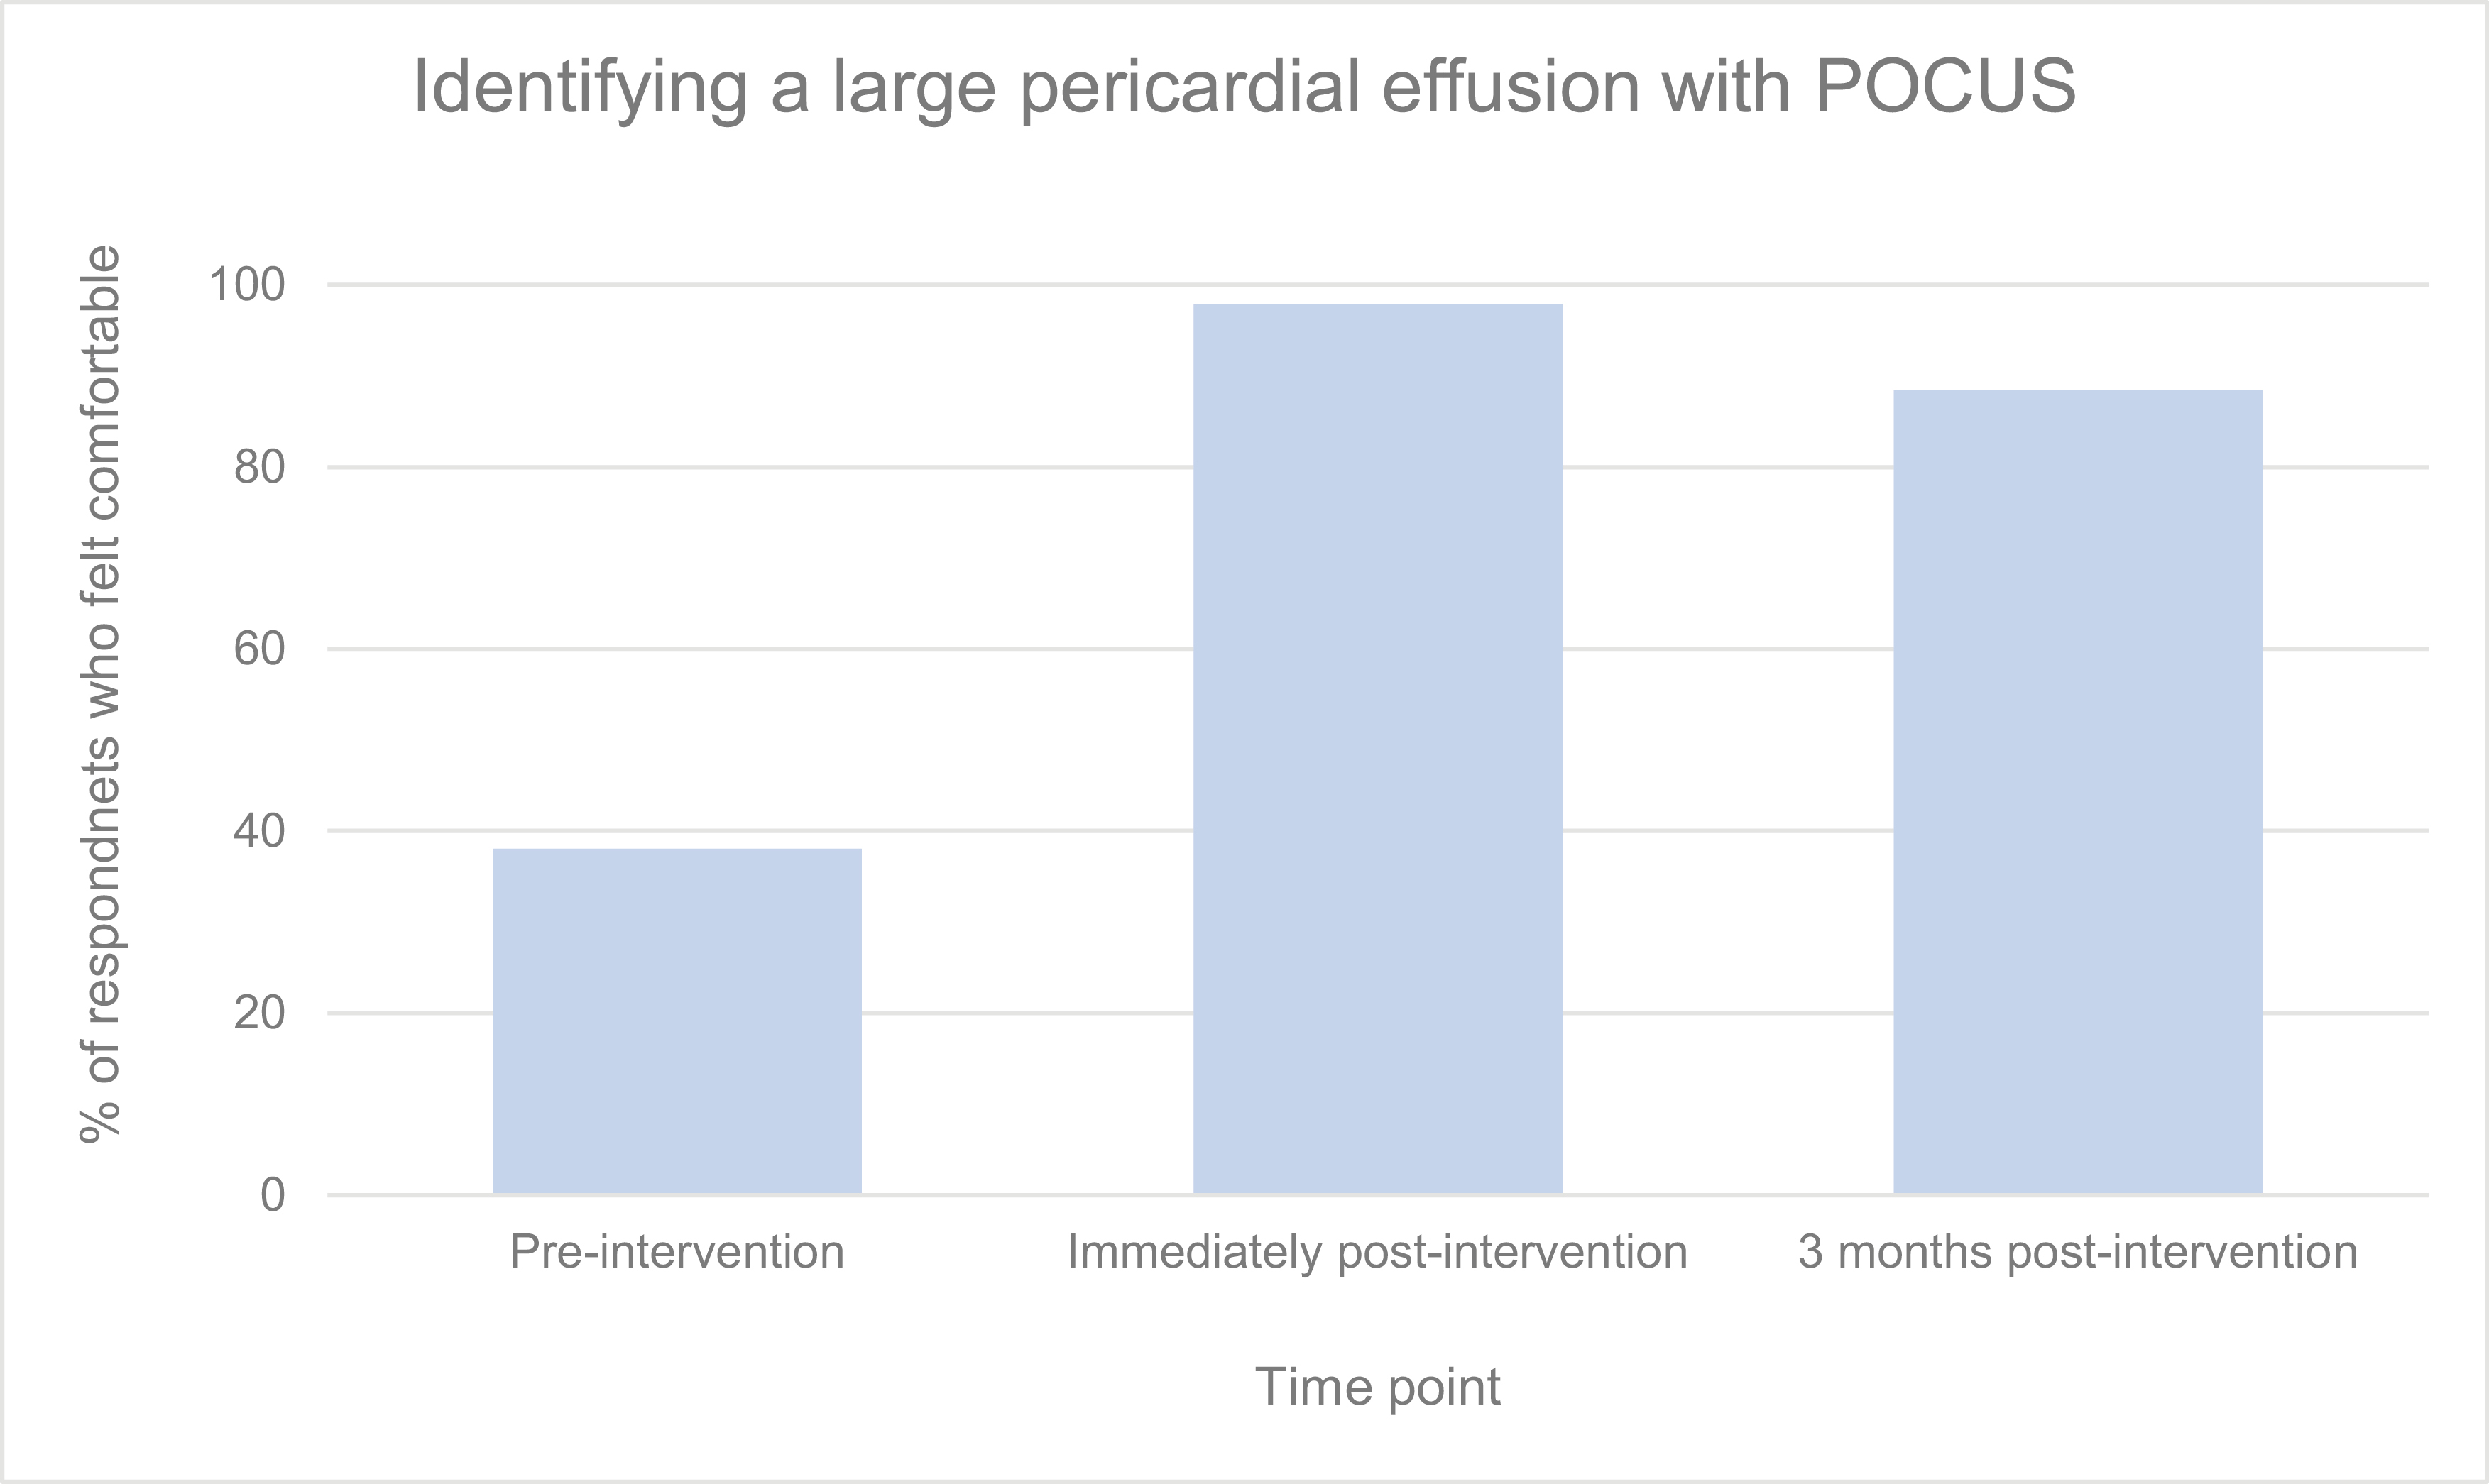 Percentage of respondents who felt comfortable identifying a large pericardial effusion with POCUS at each time point